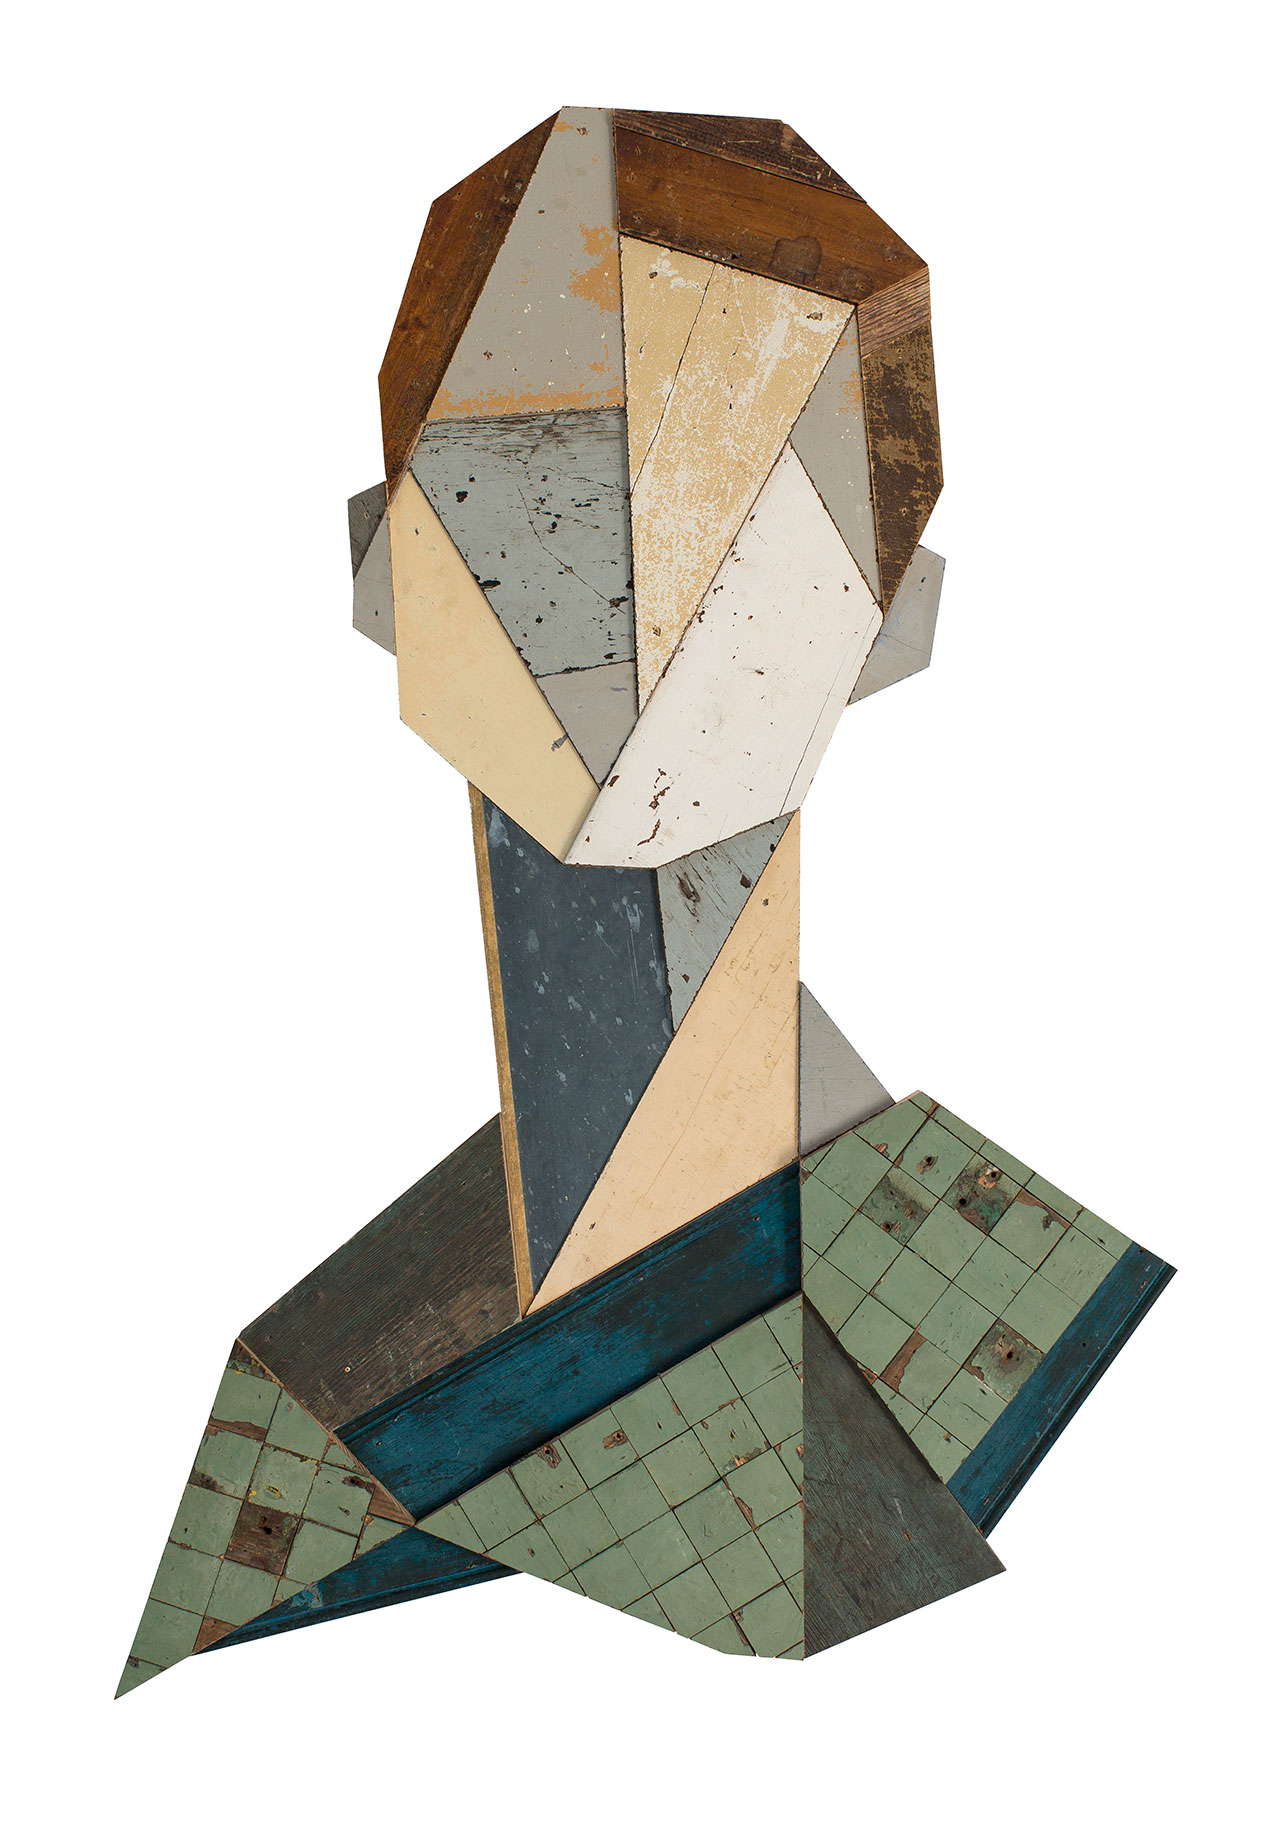 Miss Claire, 2015. Recycled wood sculpture, 114 x 67cm. Photo © Strook.